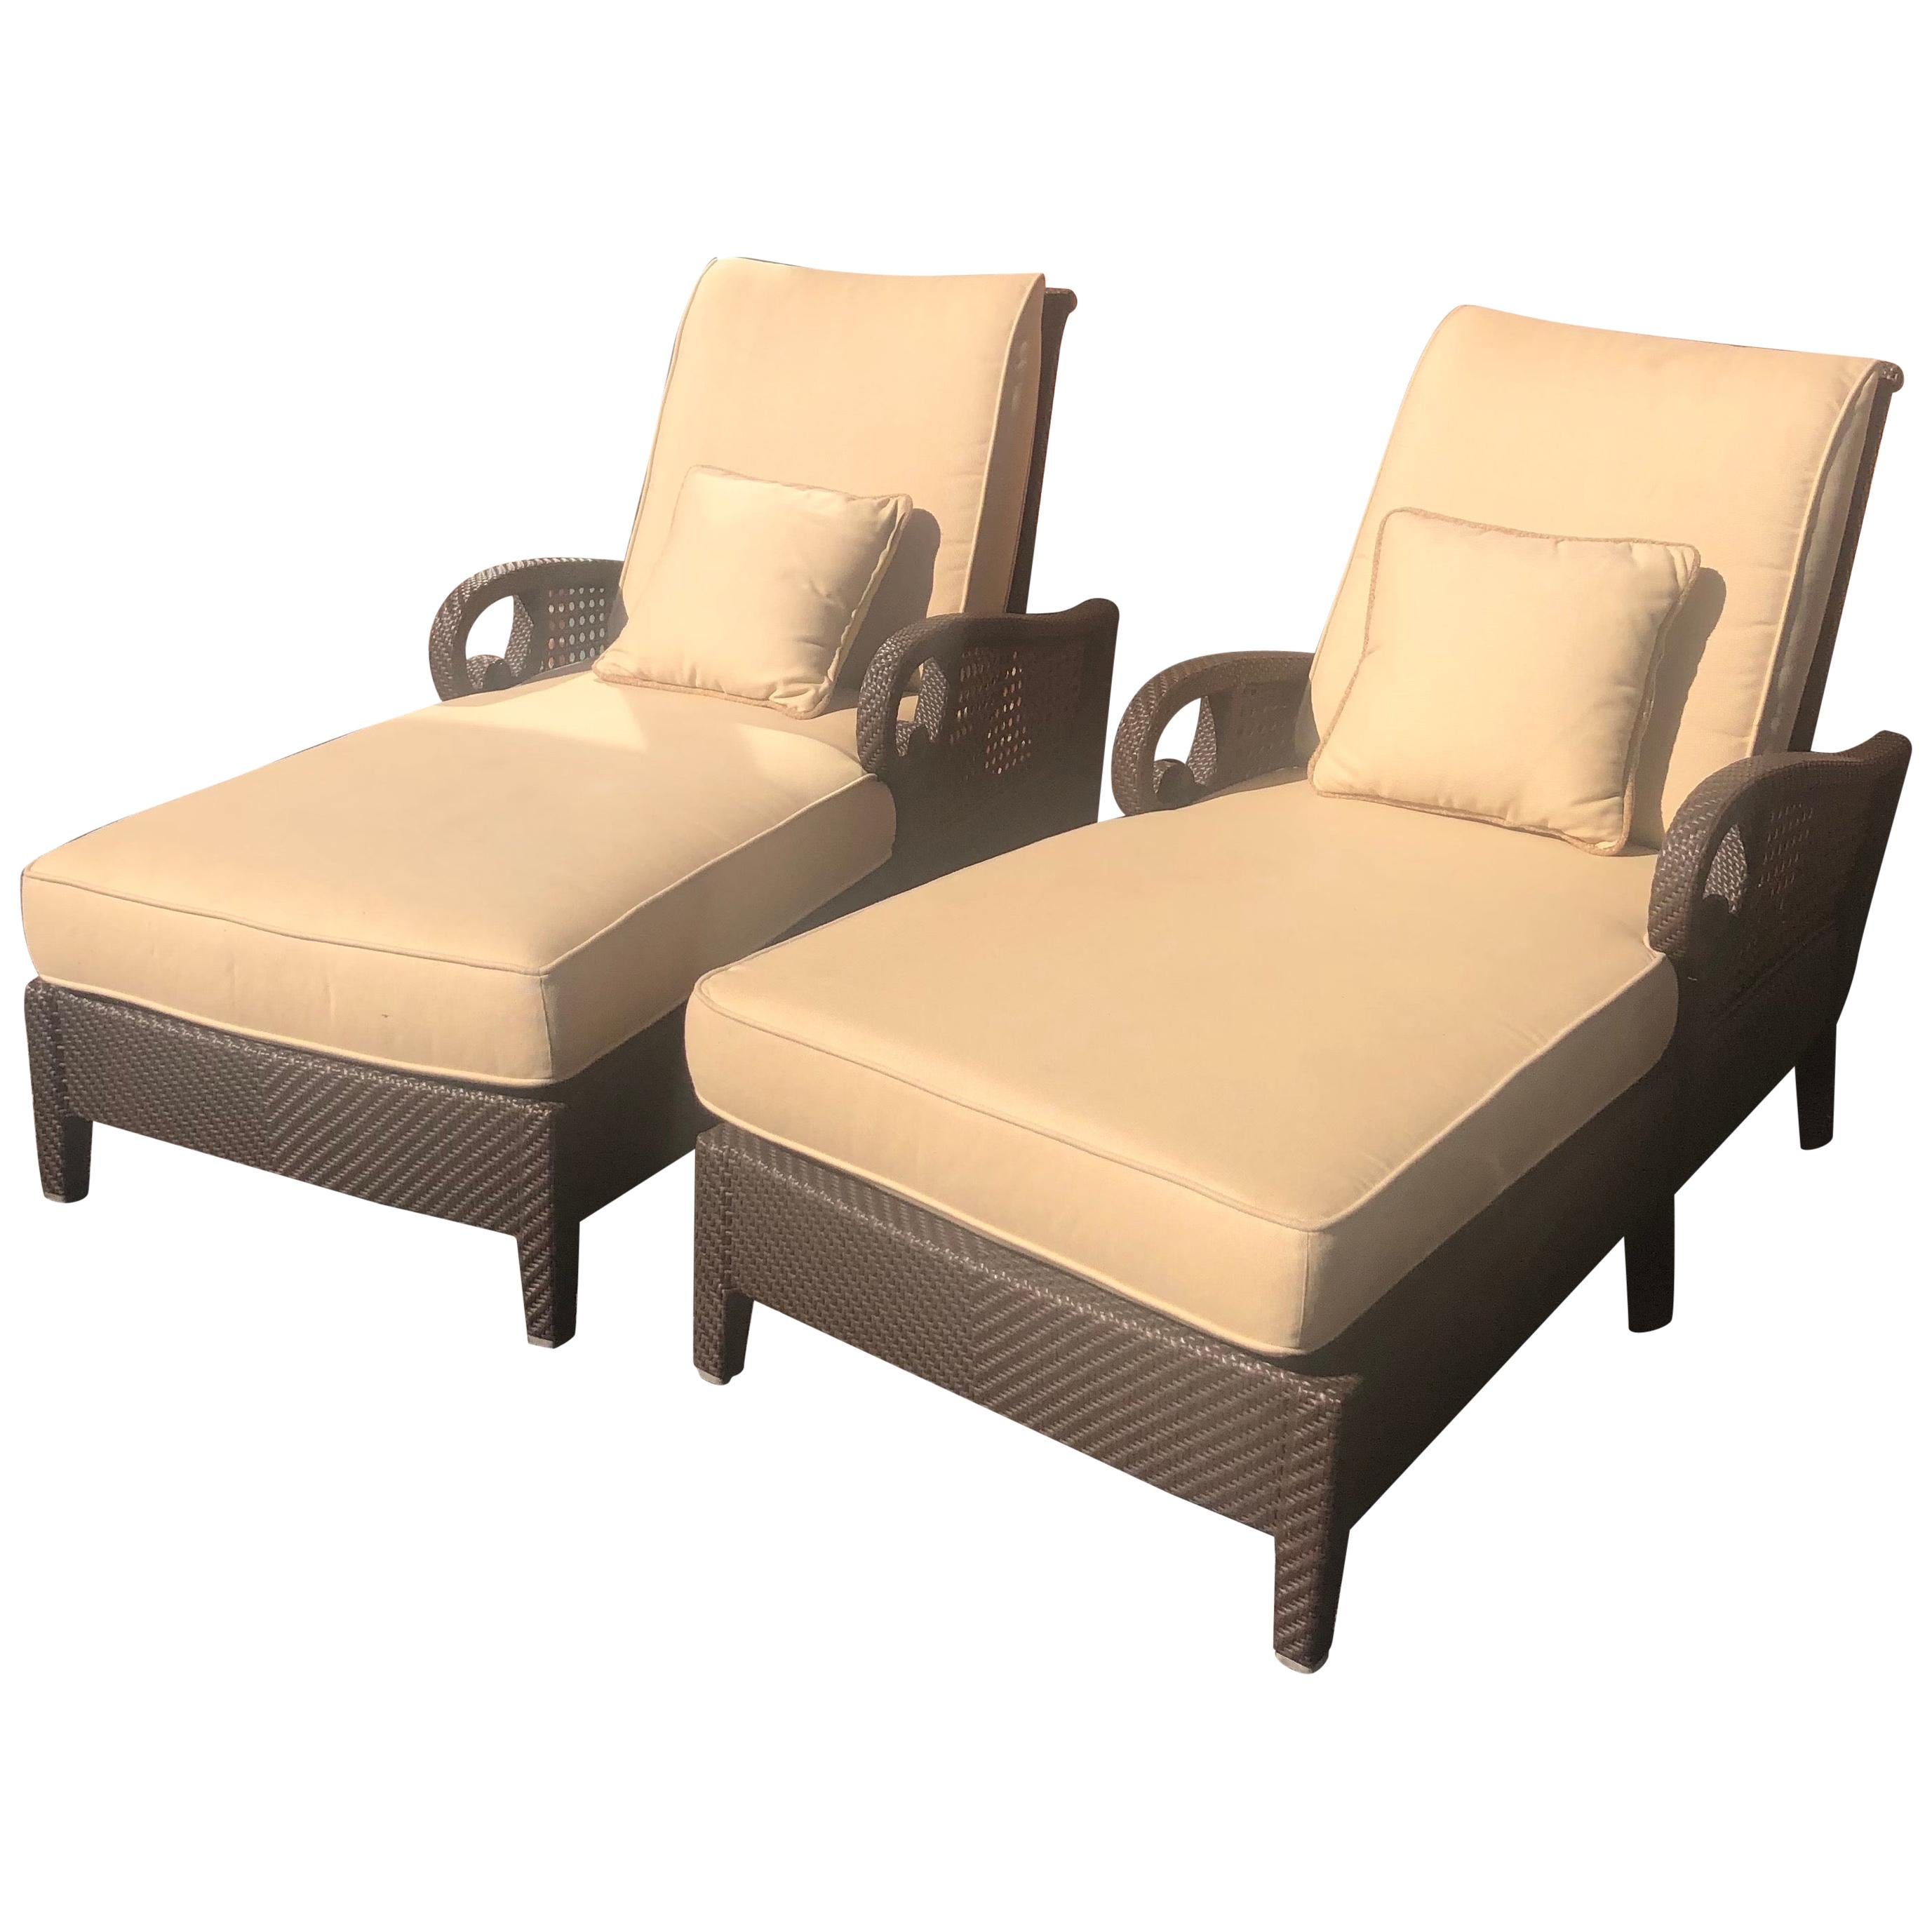 Pair of Articulating Chaise Lounges by Richard Frinier for Century Furniture